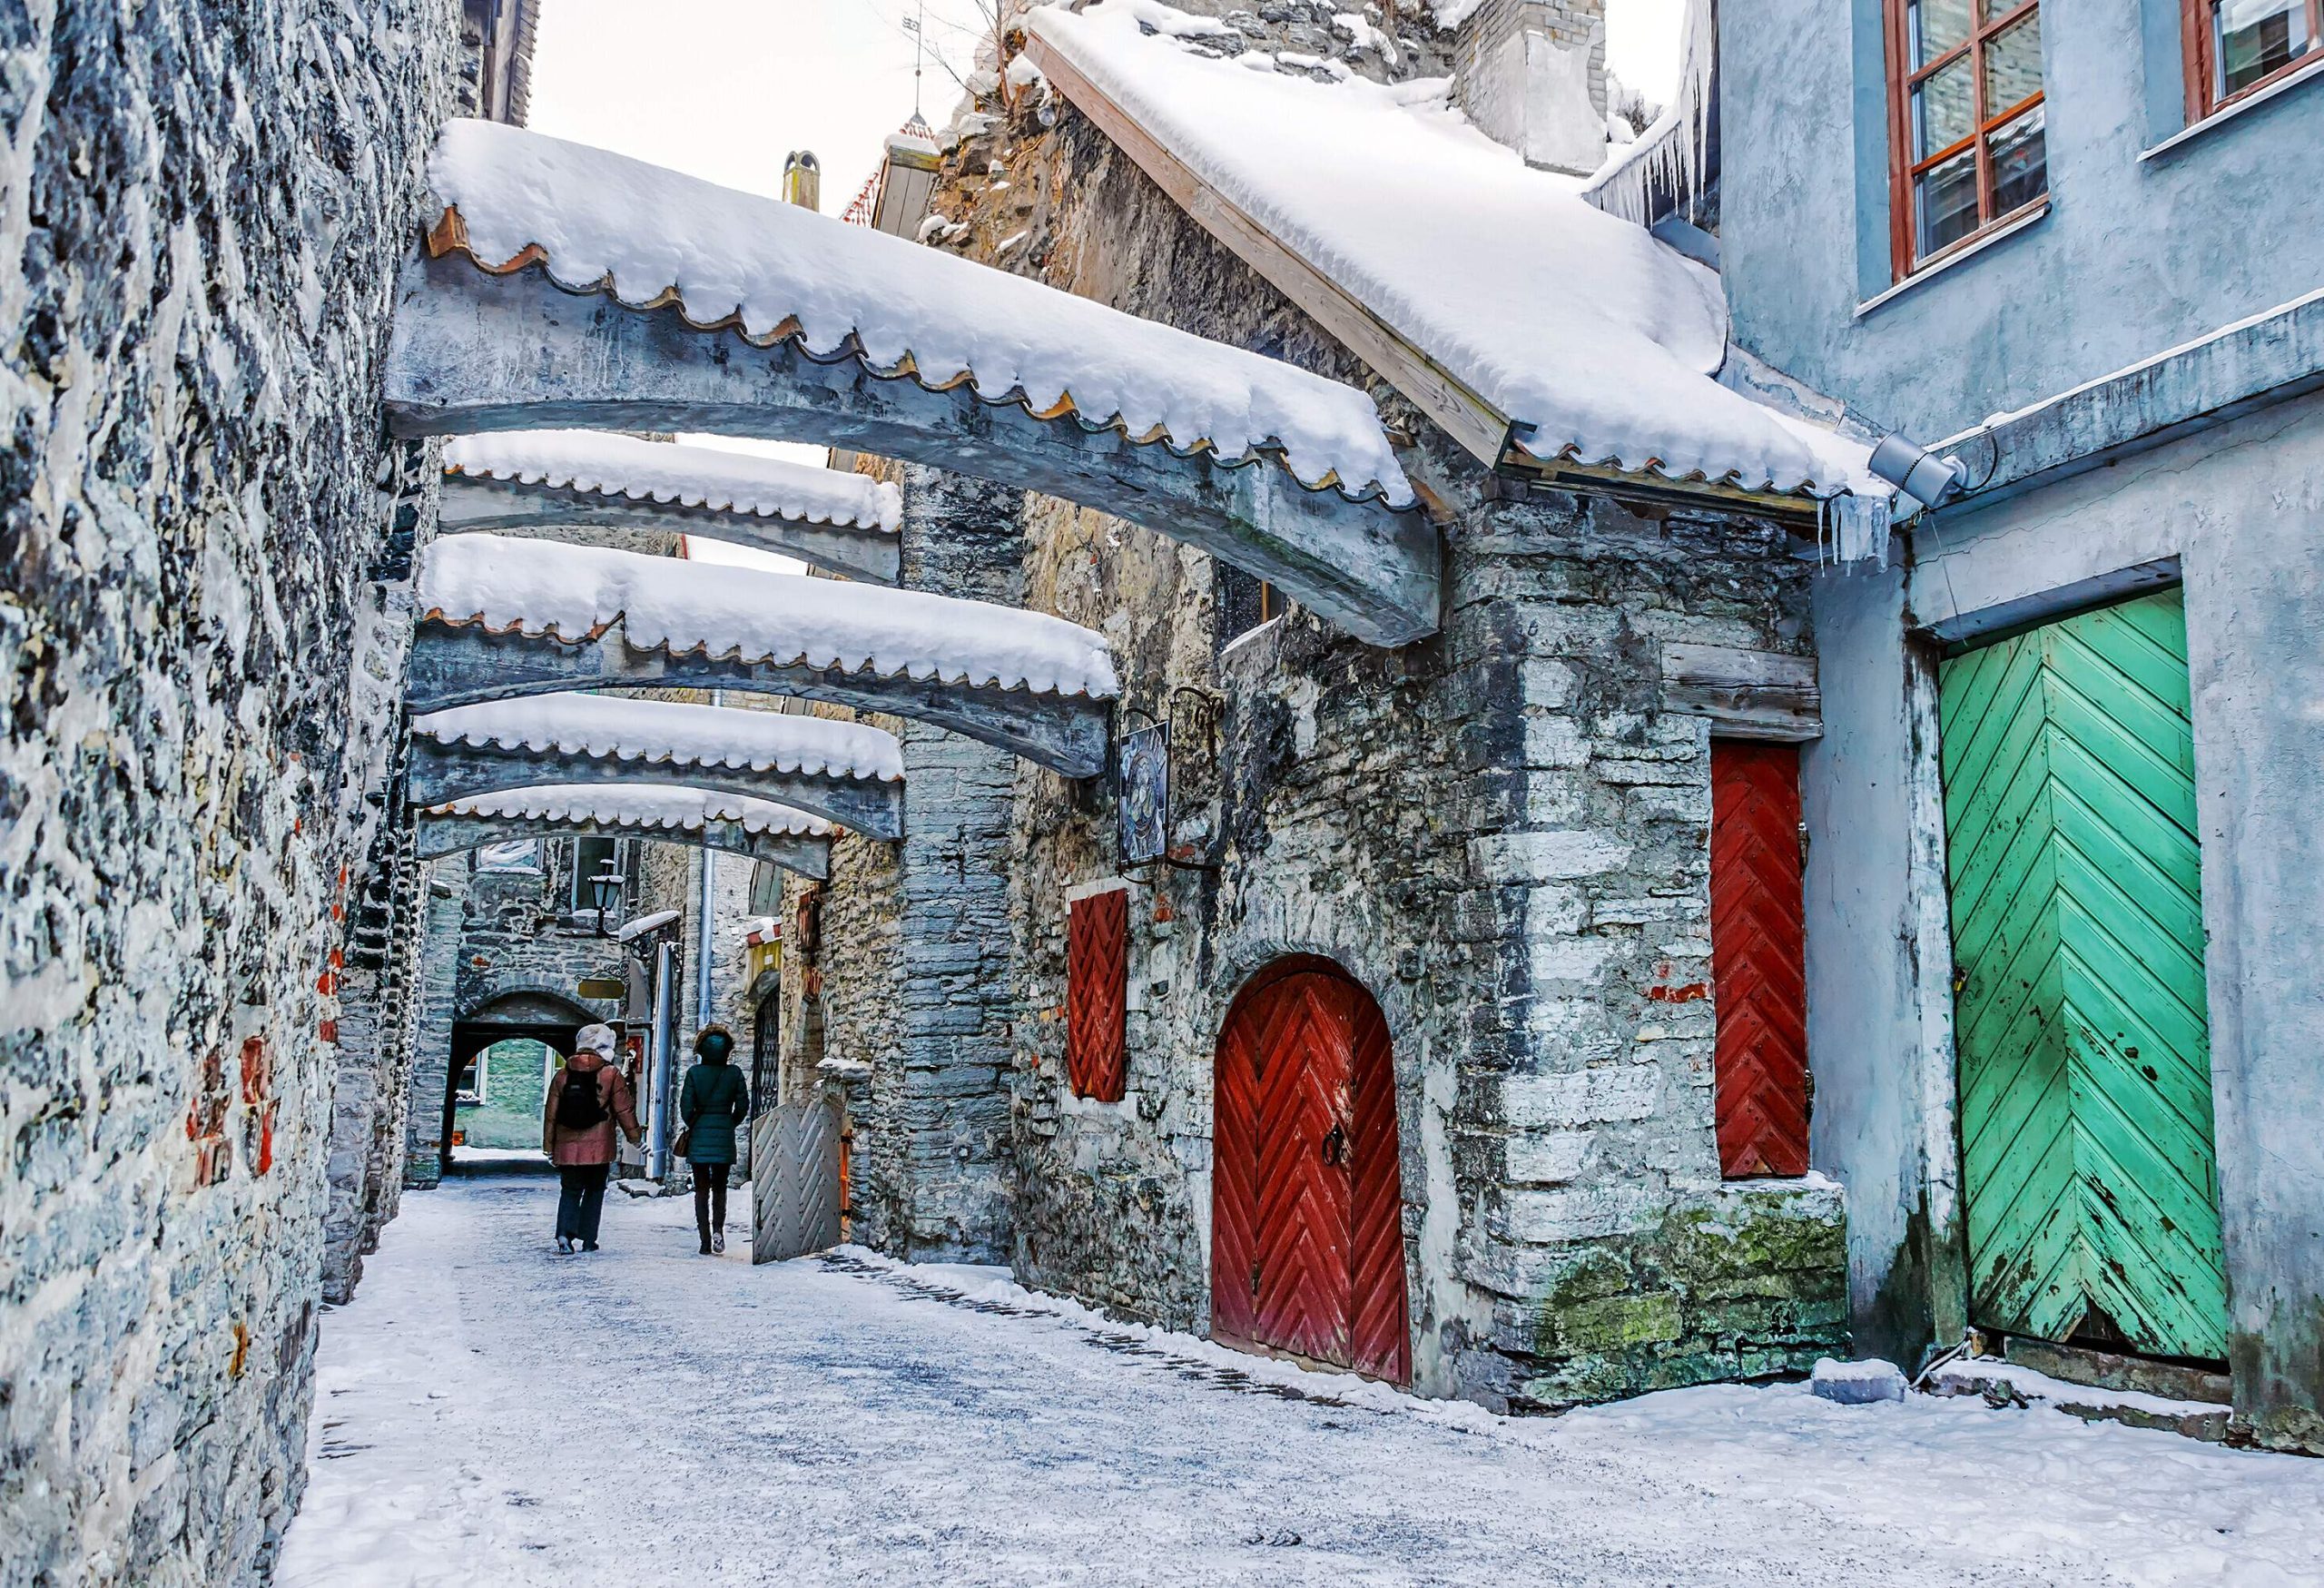 Two tourists walk on an alley under the arch ledges of old stone buildings with snow-covered roofs.